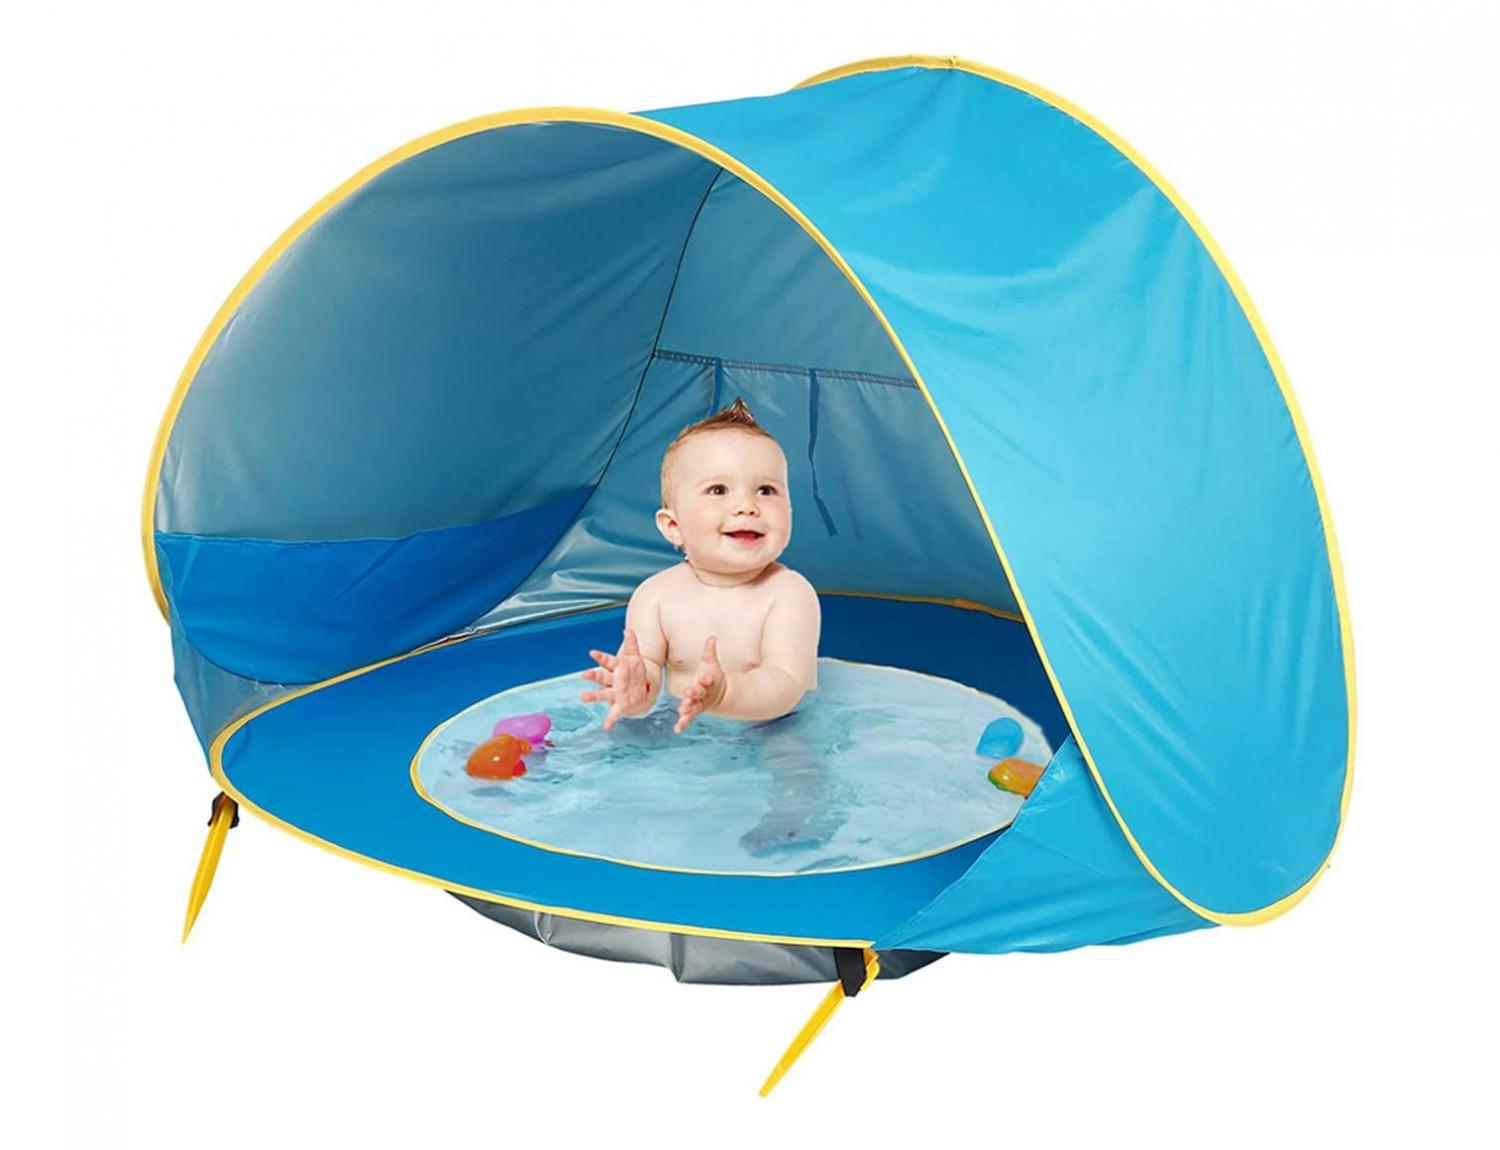 This Tiny Portable Baby Pool Beach Tent Keeps Your Little One Safe At The  Beach